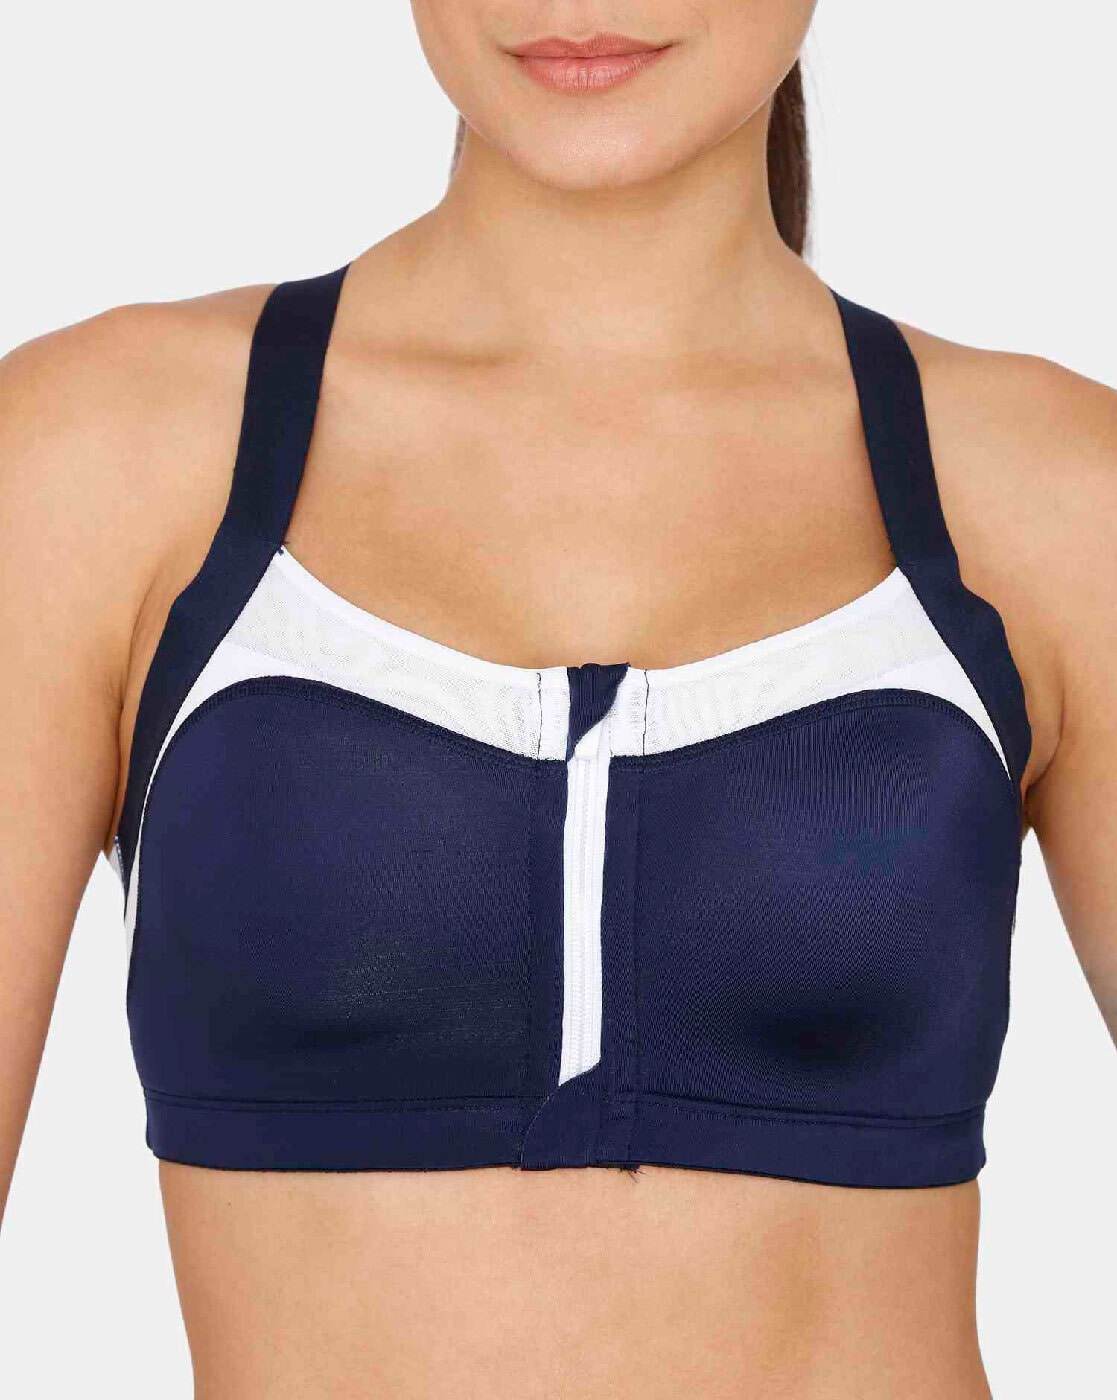 Buy Blue & White Bras for Women by ZELOCITY Online